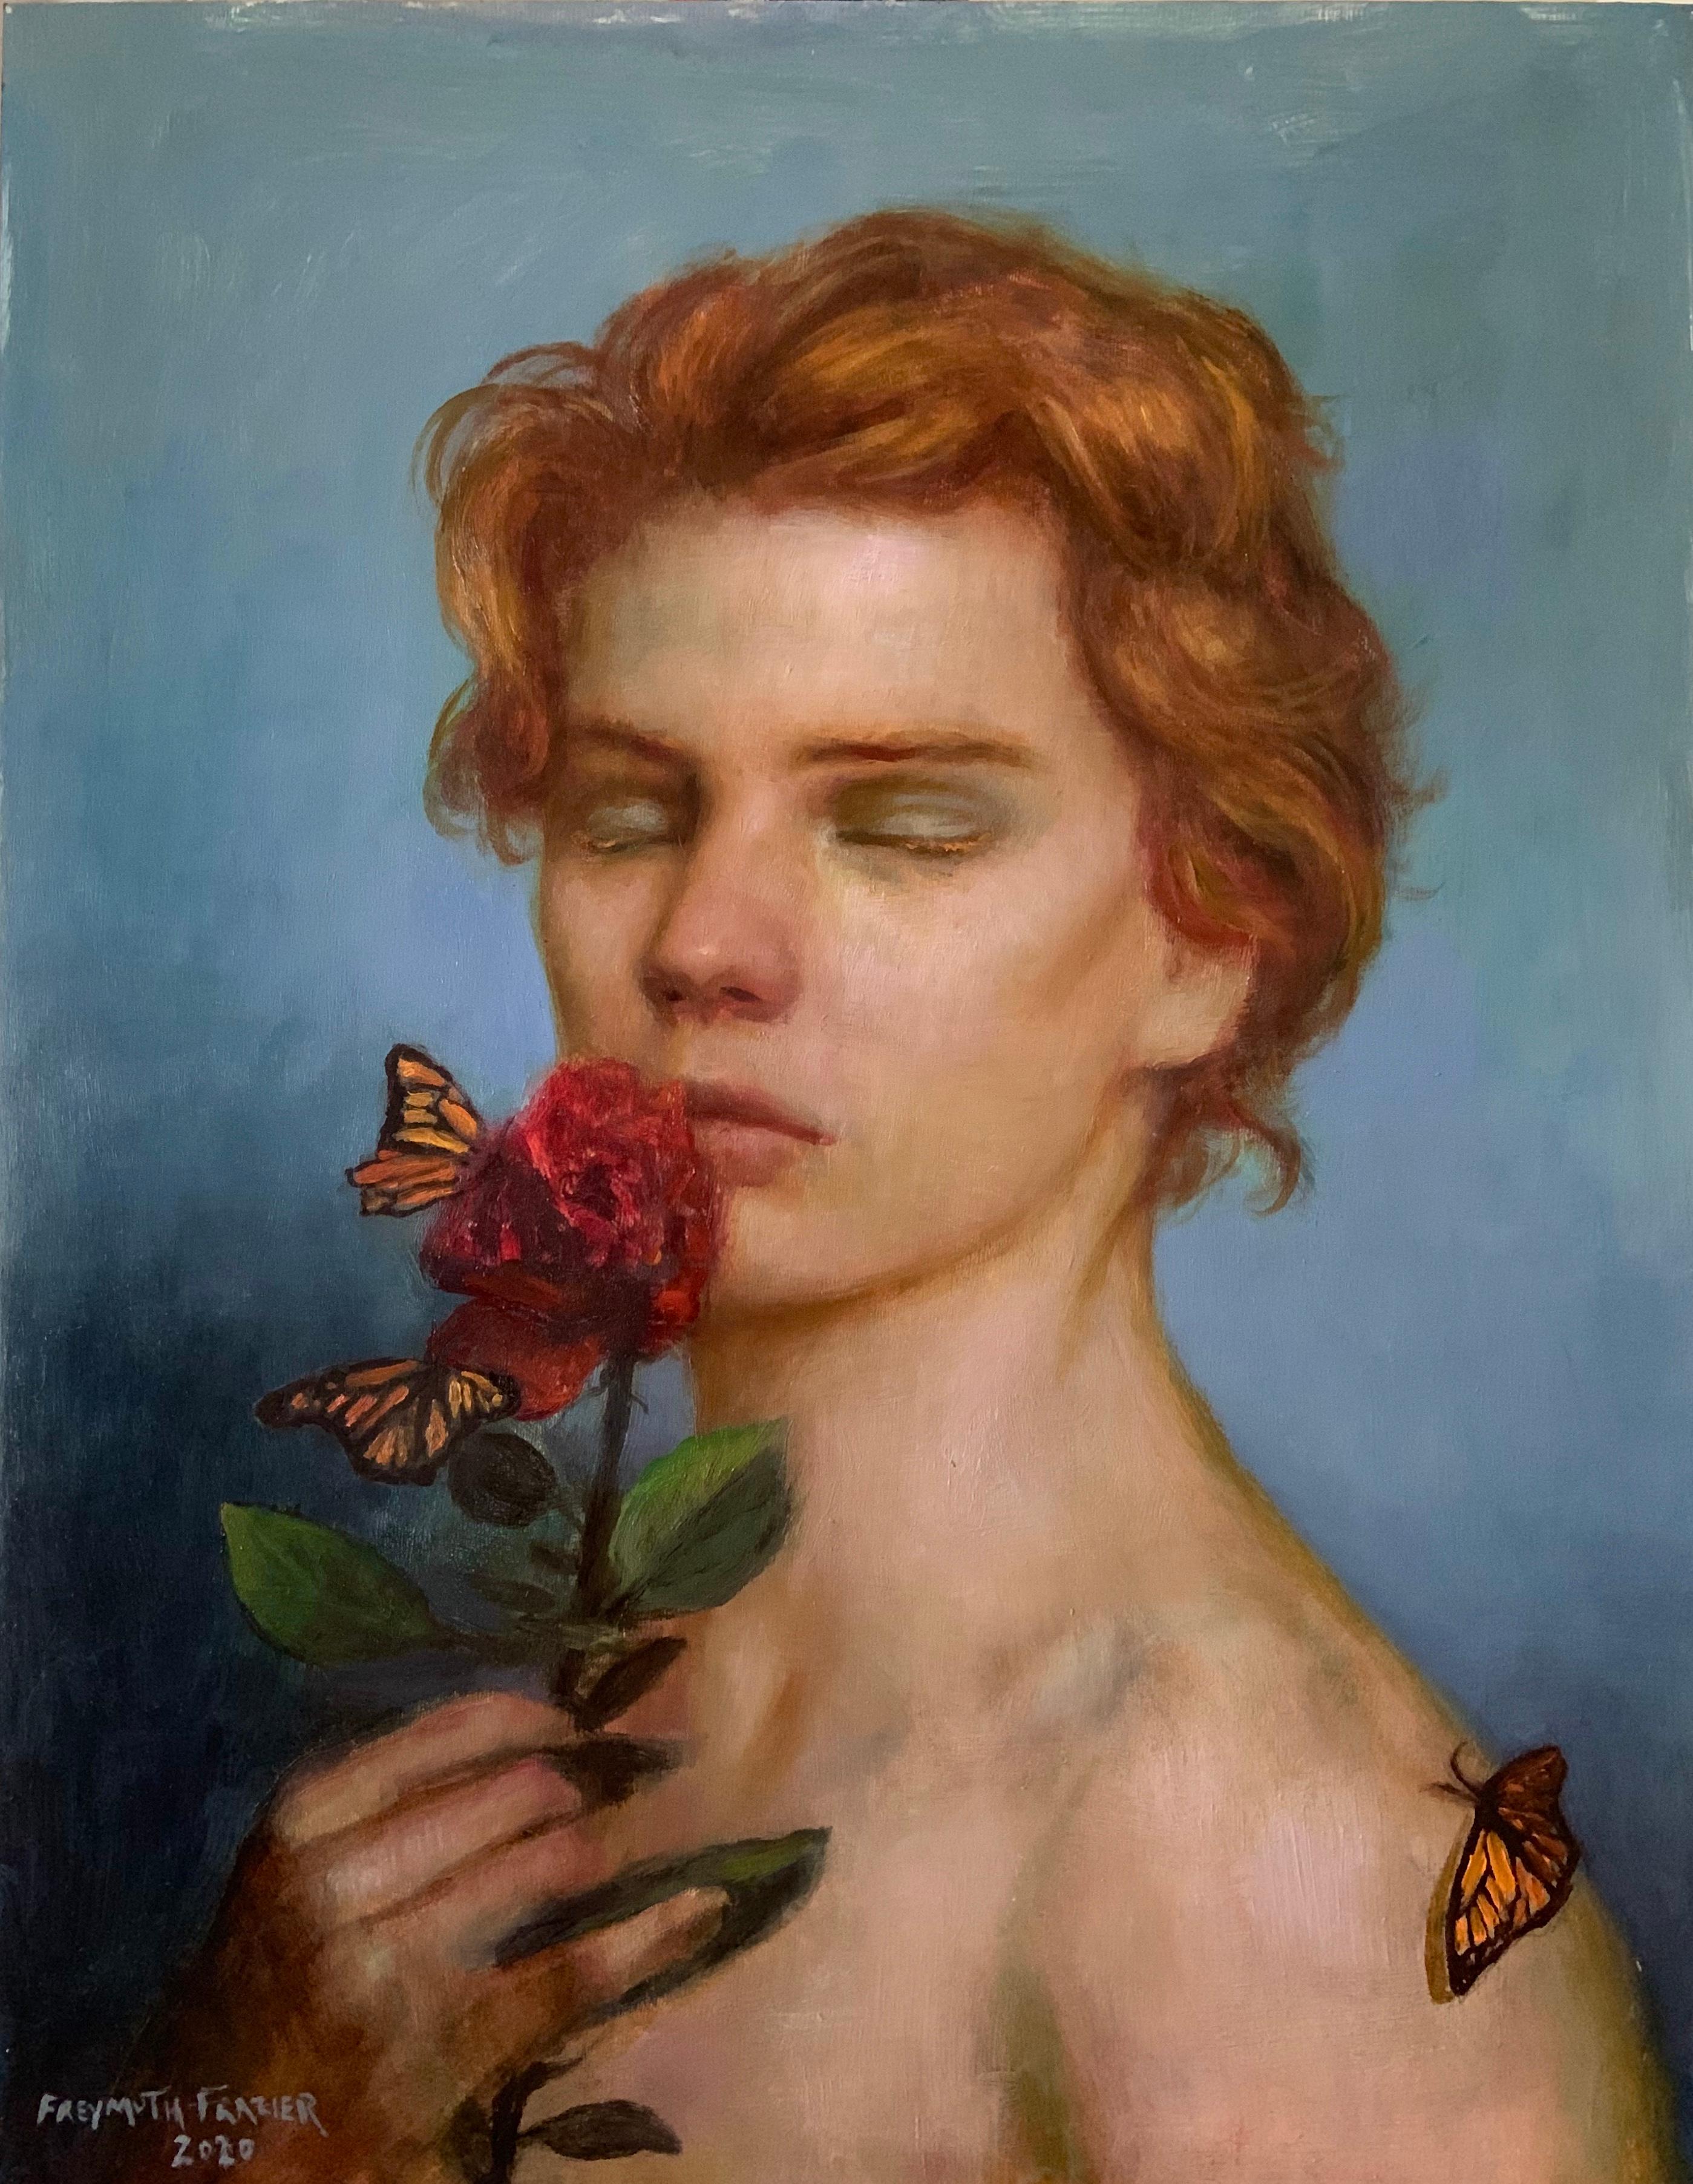 Rose Freymuth-Frazier Figurative Painting - Redheaded Boy, Young Male Portrait w/ Rose and Butterflies, Framed, Oil on Panel